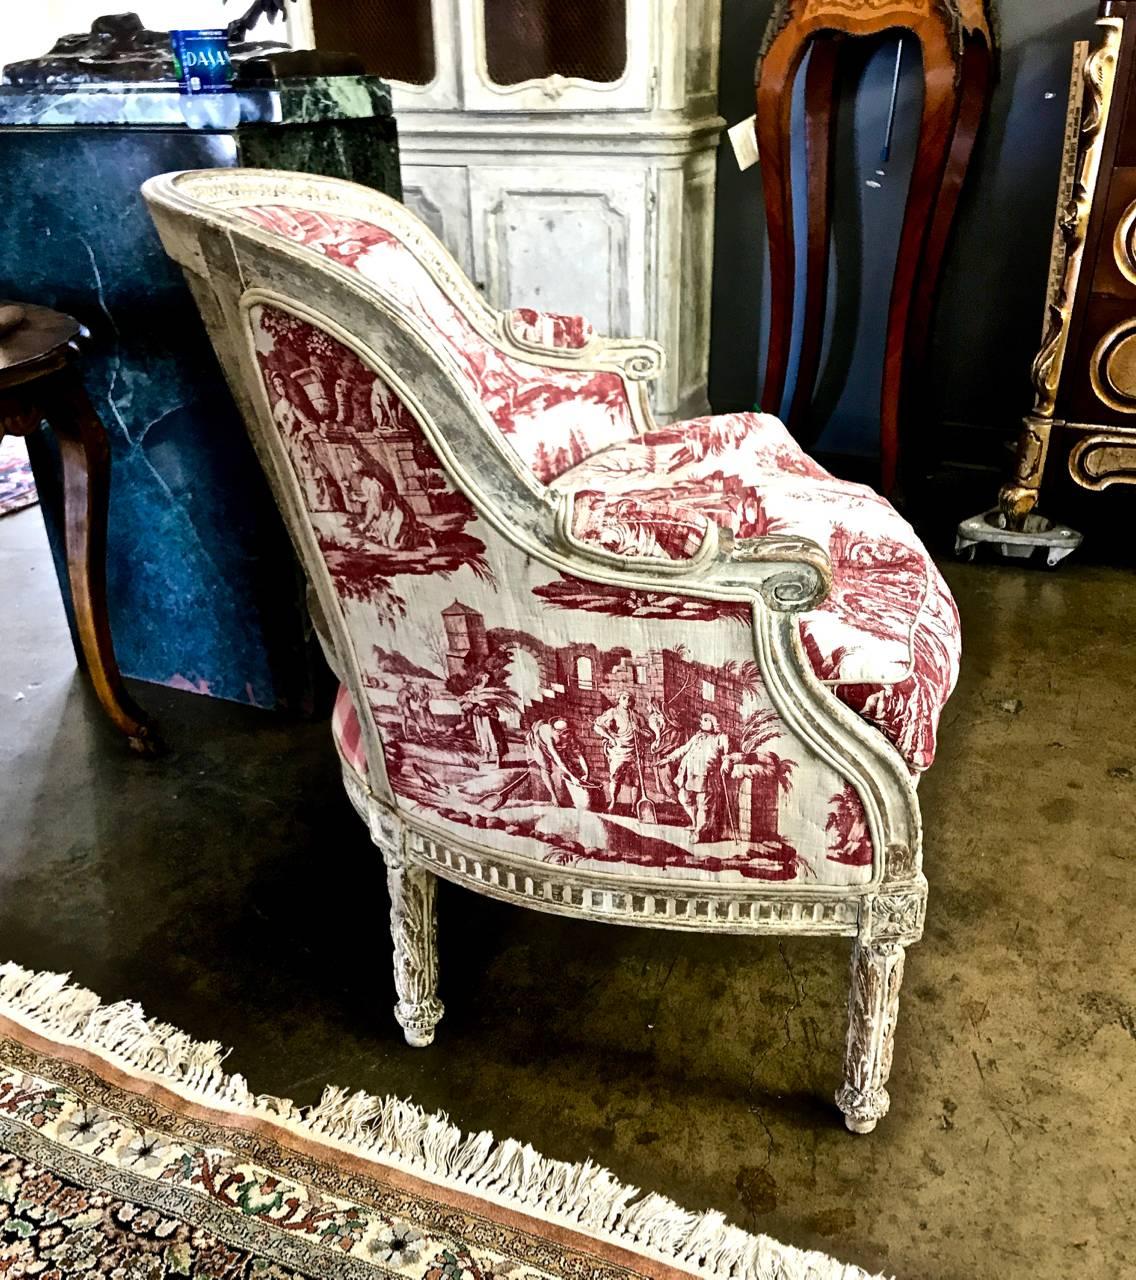 This is a stunning example of a painted period 18th century, Louis XVI bergere. The bergere appears to retain its original off-white/ivory finish and exhibits great natural patina. It has been upholstered in an early 19th century Toile that features